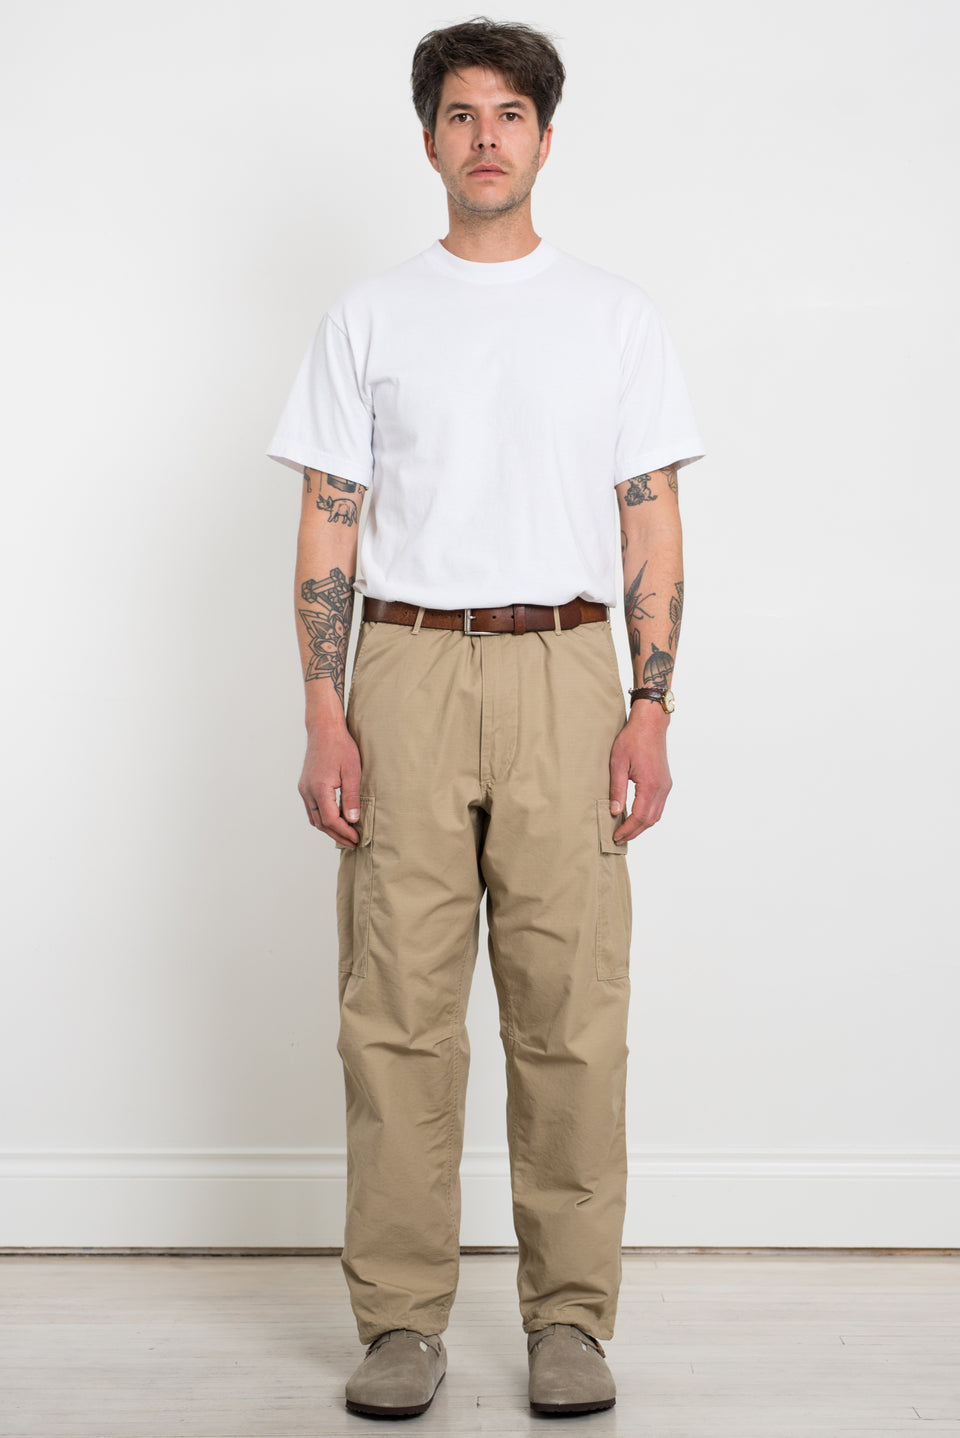 OrSlow 23SS SS23 03-V5260RIP-67 Vintage Fit 6 Pocket Cargo Pants Beige  Calculus Victoria BC Canada